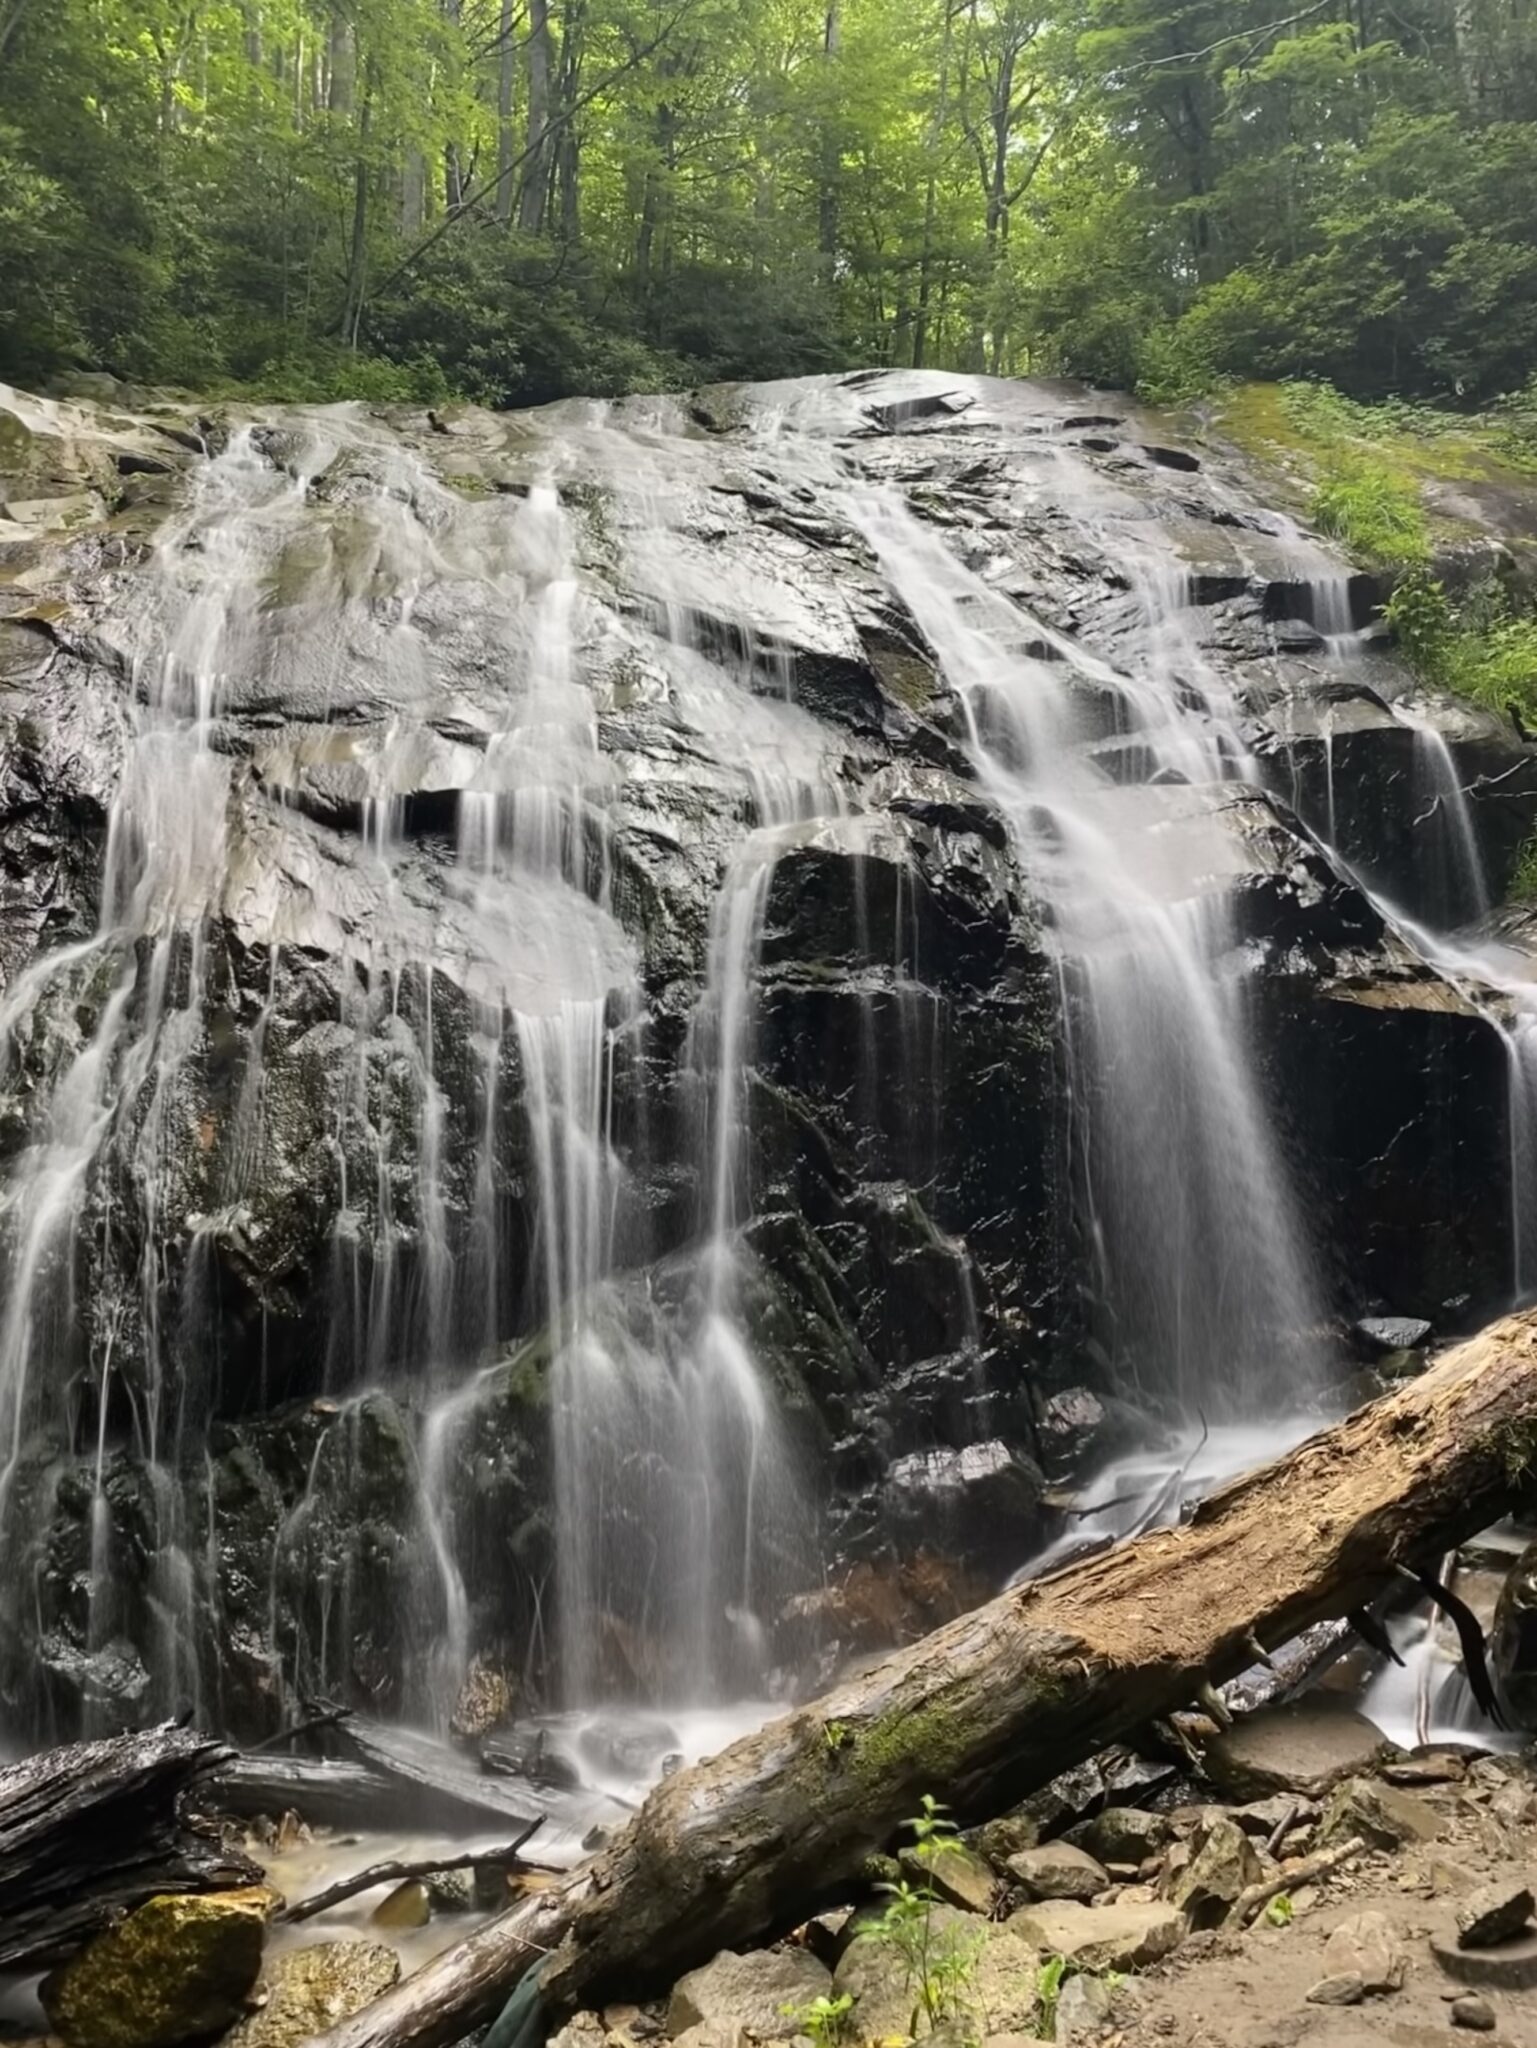 30+ Great Things to Do in Blowing Rock NC (Hiking and More!)